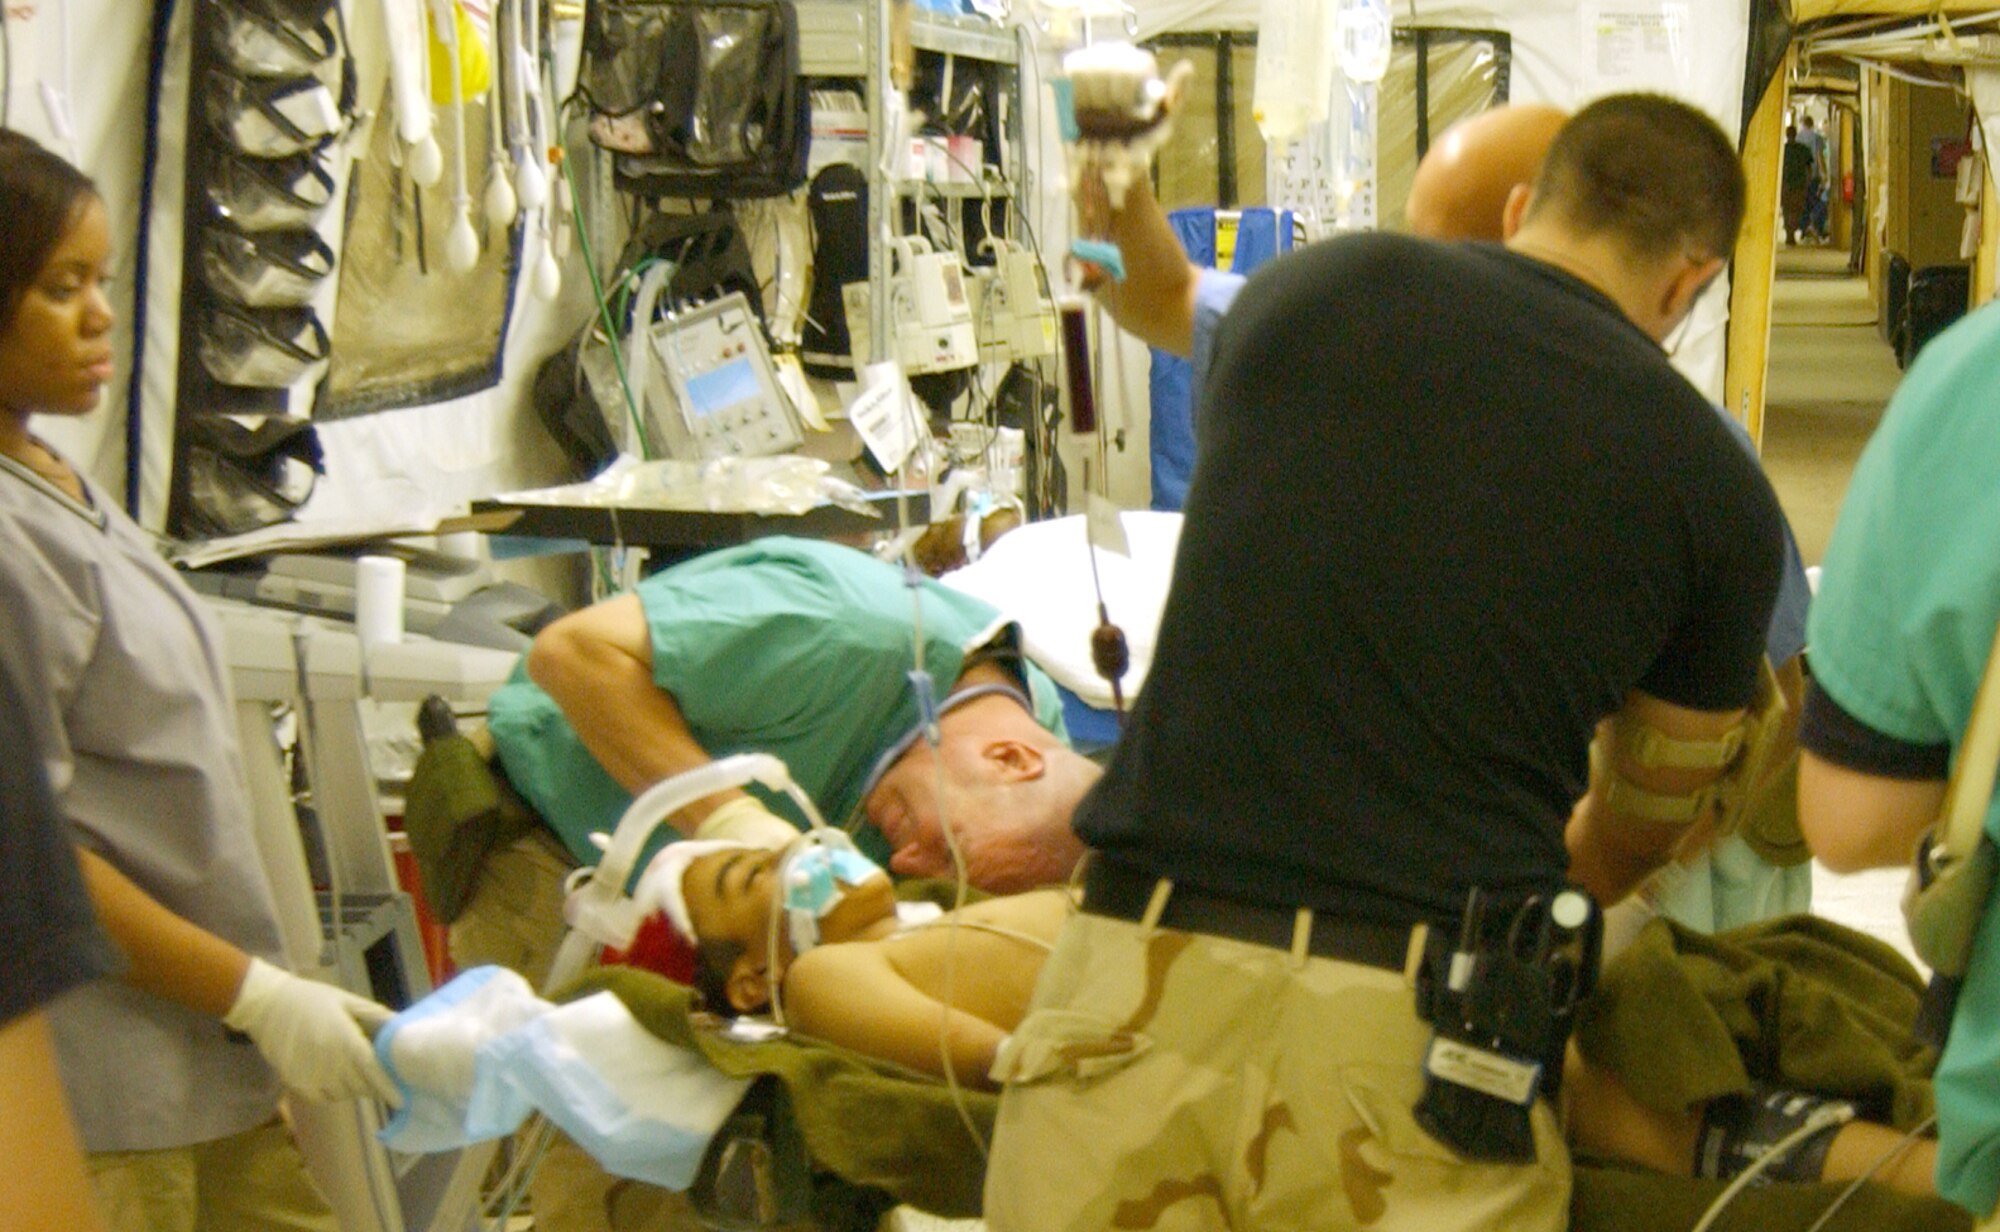 Medics work to stabilize a patient at the Air Force Theater Hospital here July 19. As the central military medical hub for Iraq, the 332d Air Expeditionary Wing averages about 750 emergency surgical operations a month and is leading new advances that may save lives. 